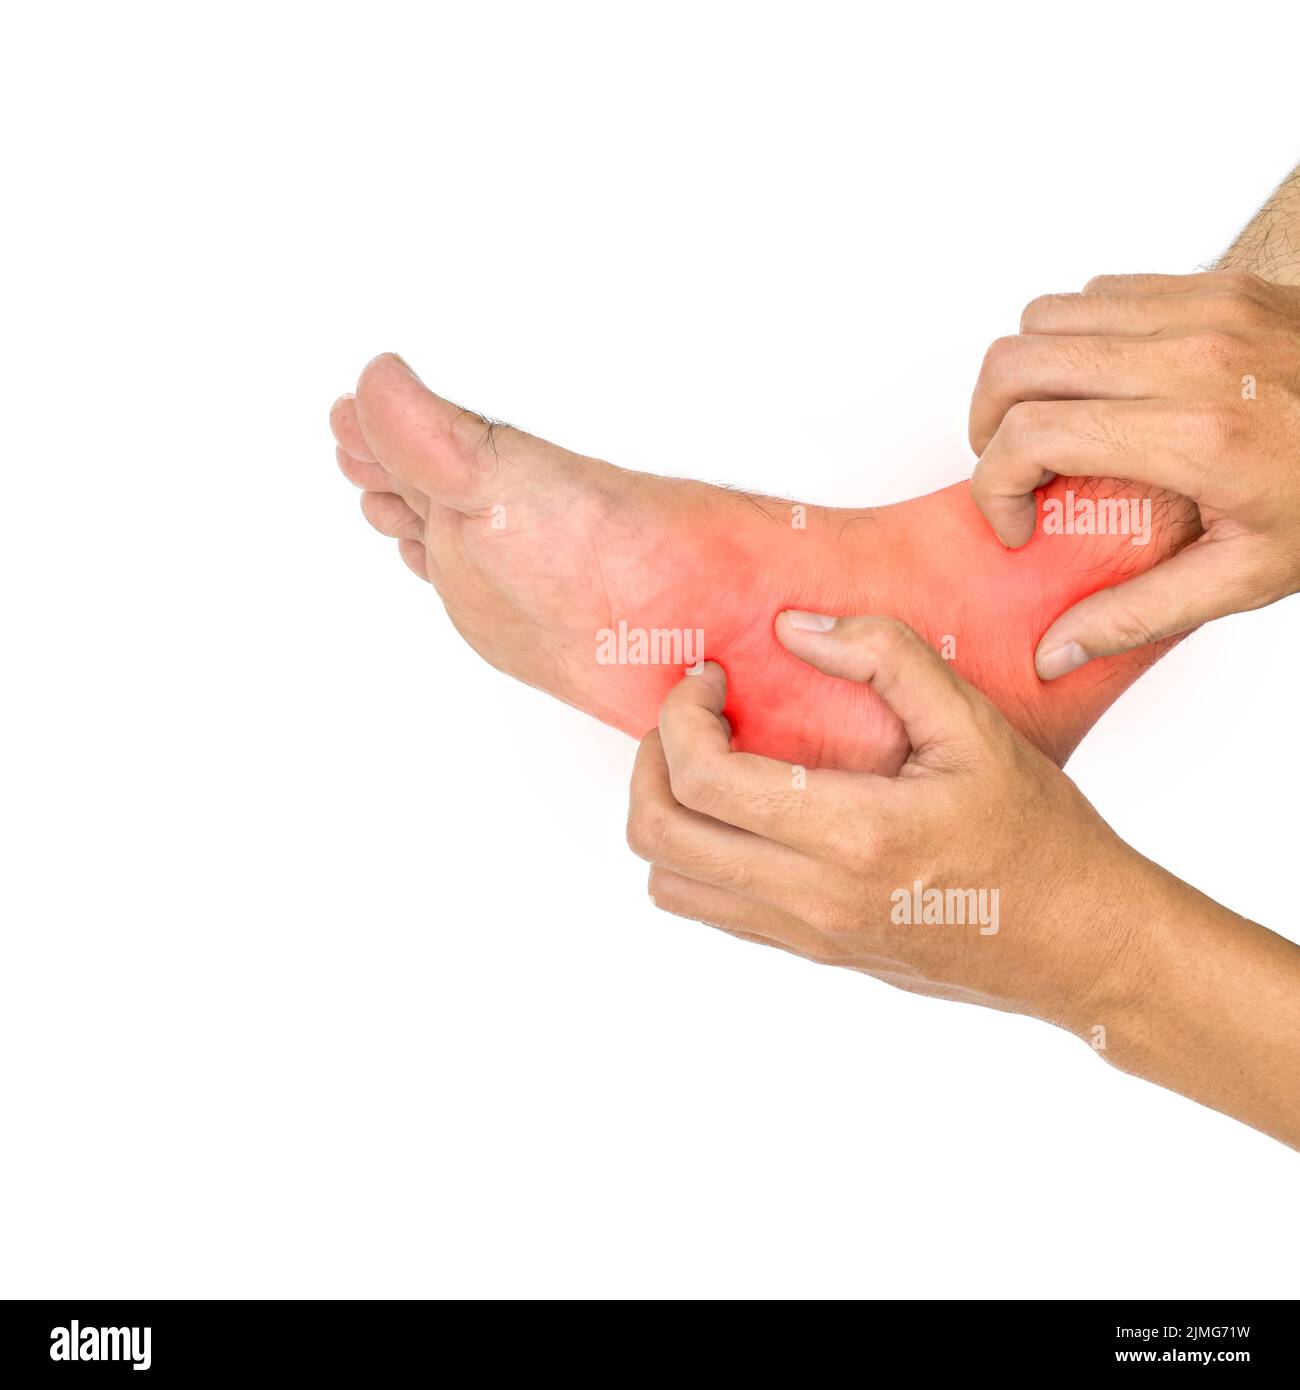 Itchy foot skin of Asian young man. Concept of skin diseases such as scabies, fungal infection, allergy, etc. Stock Photo